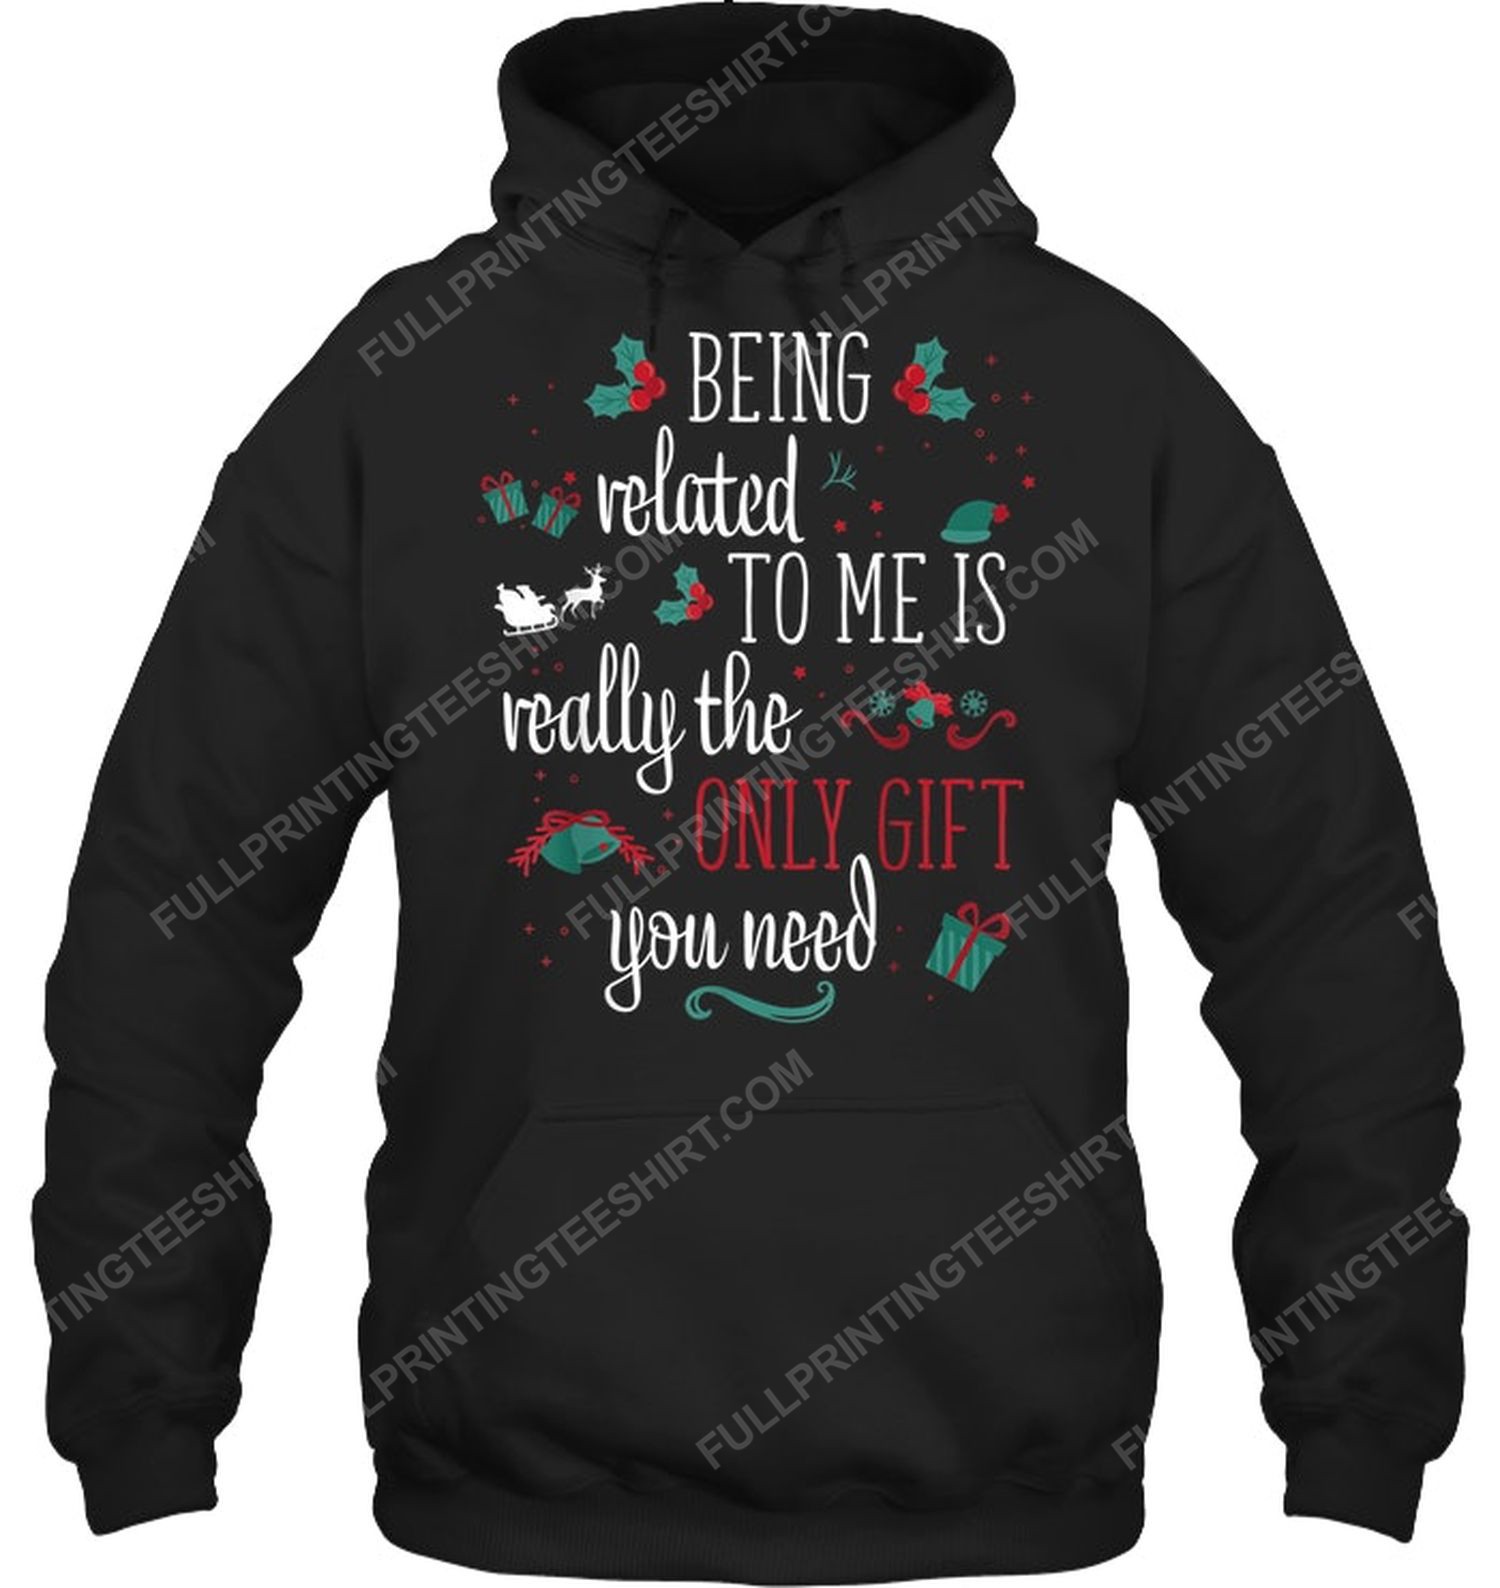 Being related to me is really the only gift you need hoodie